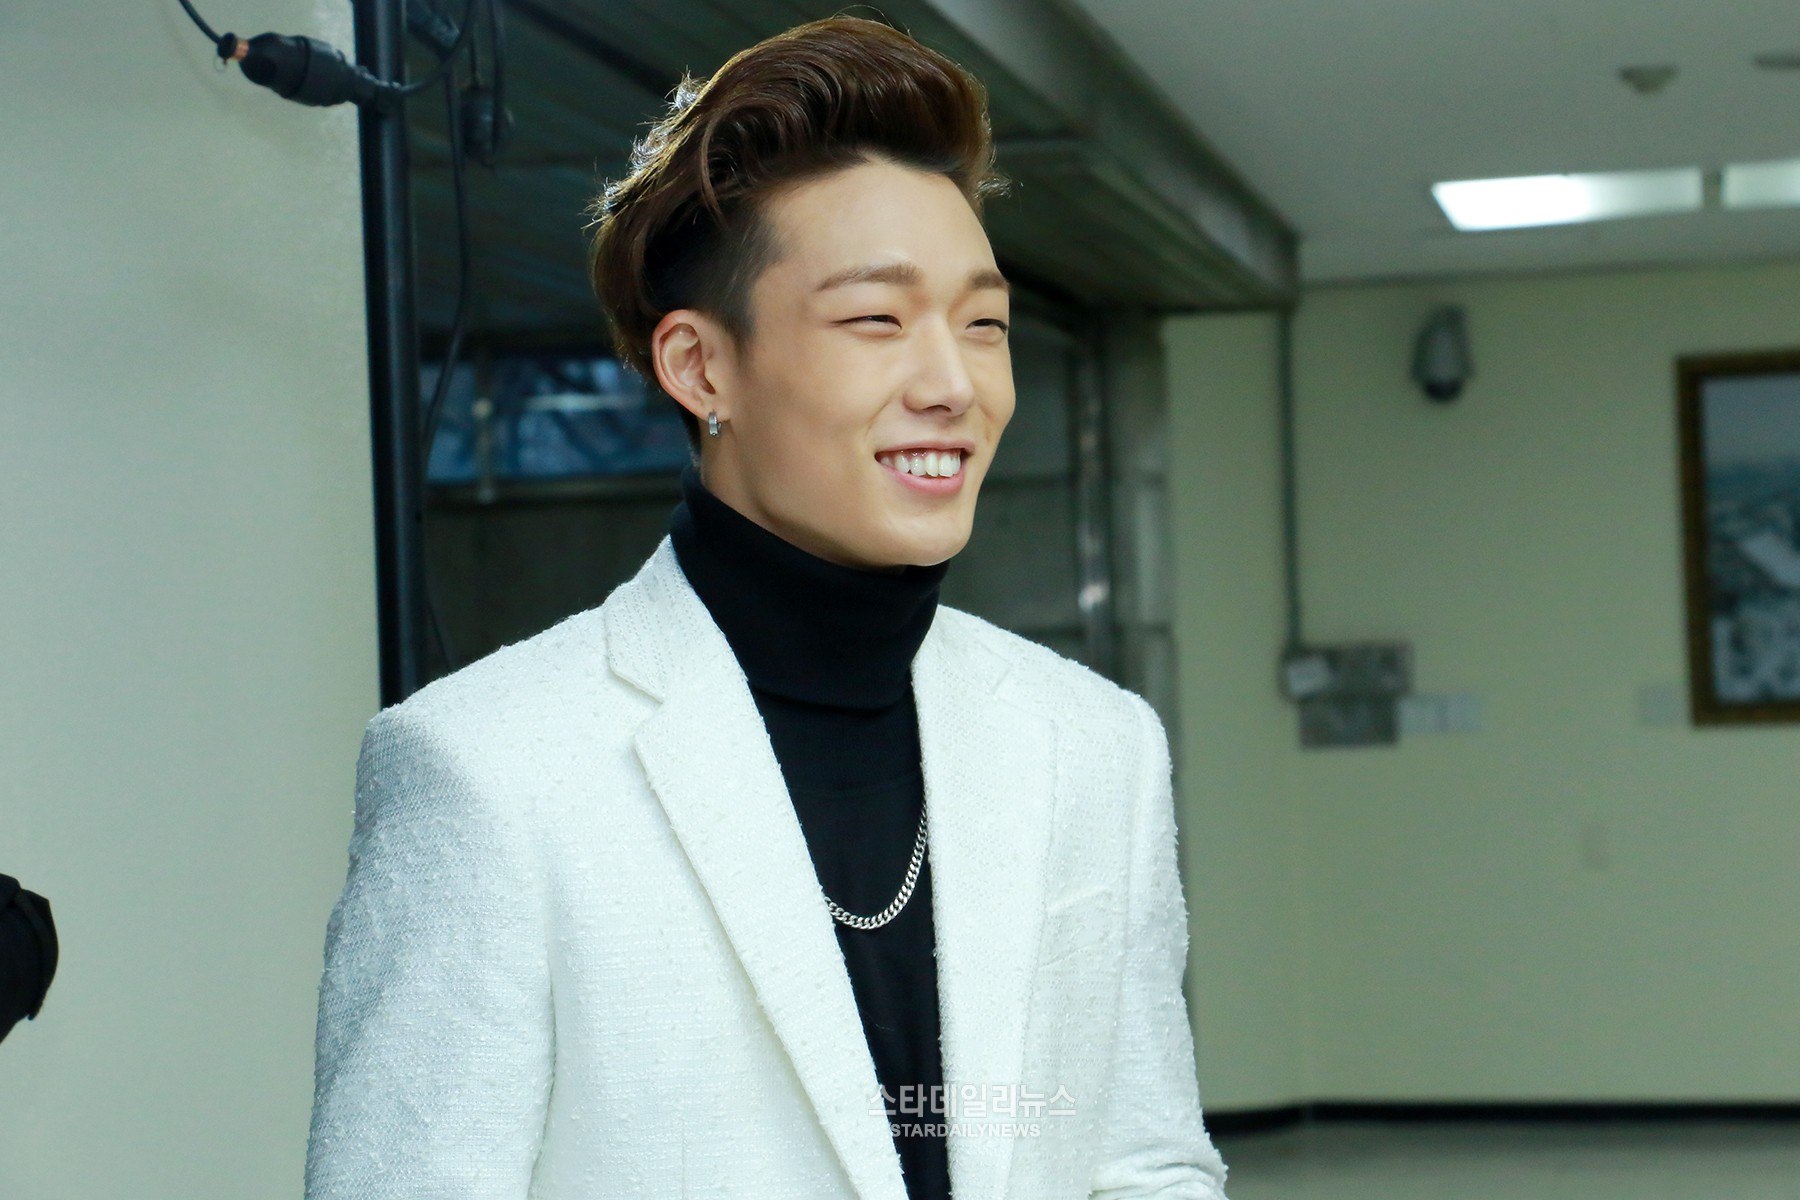 iKON Bobby Pre-Debut Life Completely Exposed By Past Social Media Posts - Koreaboo1800 x 1200